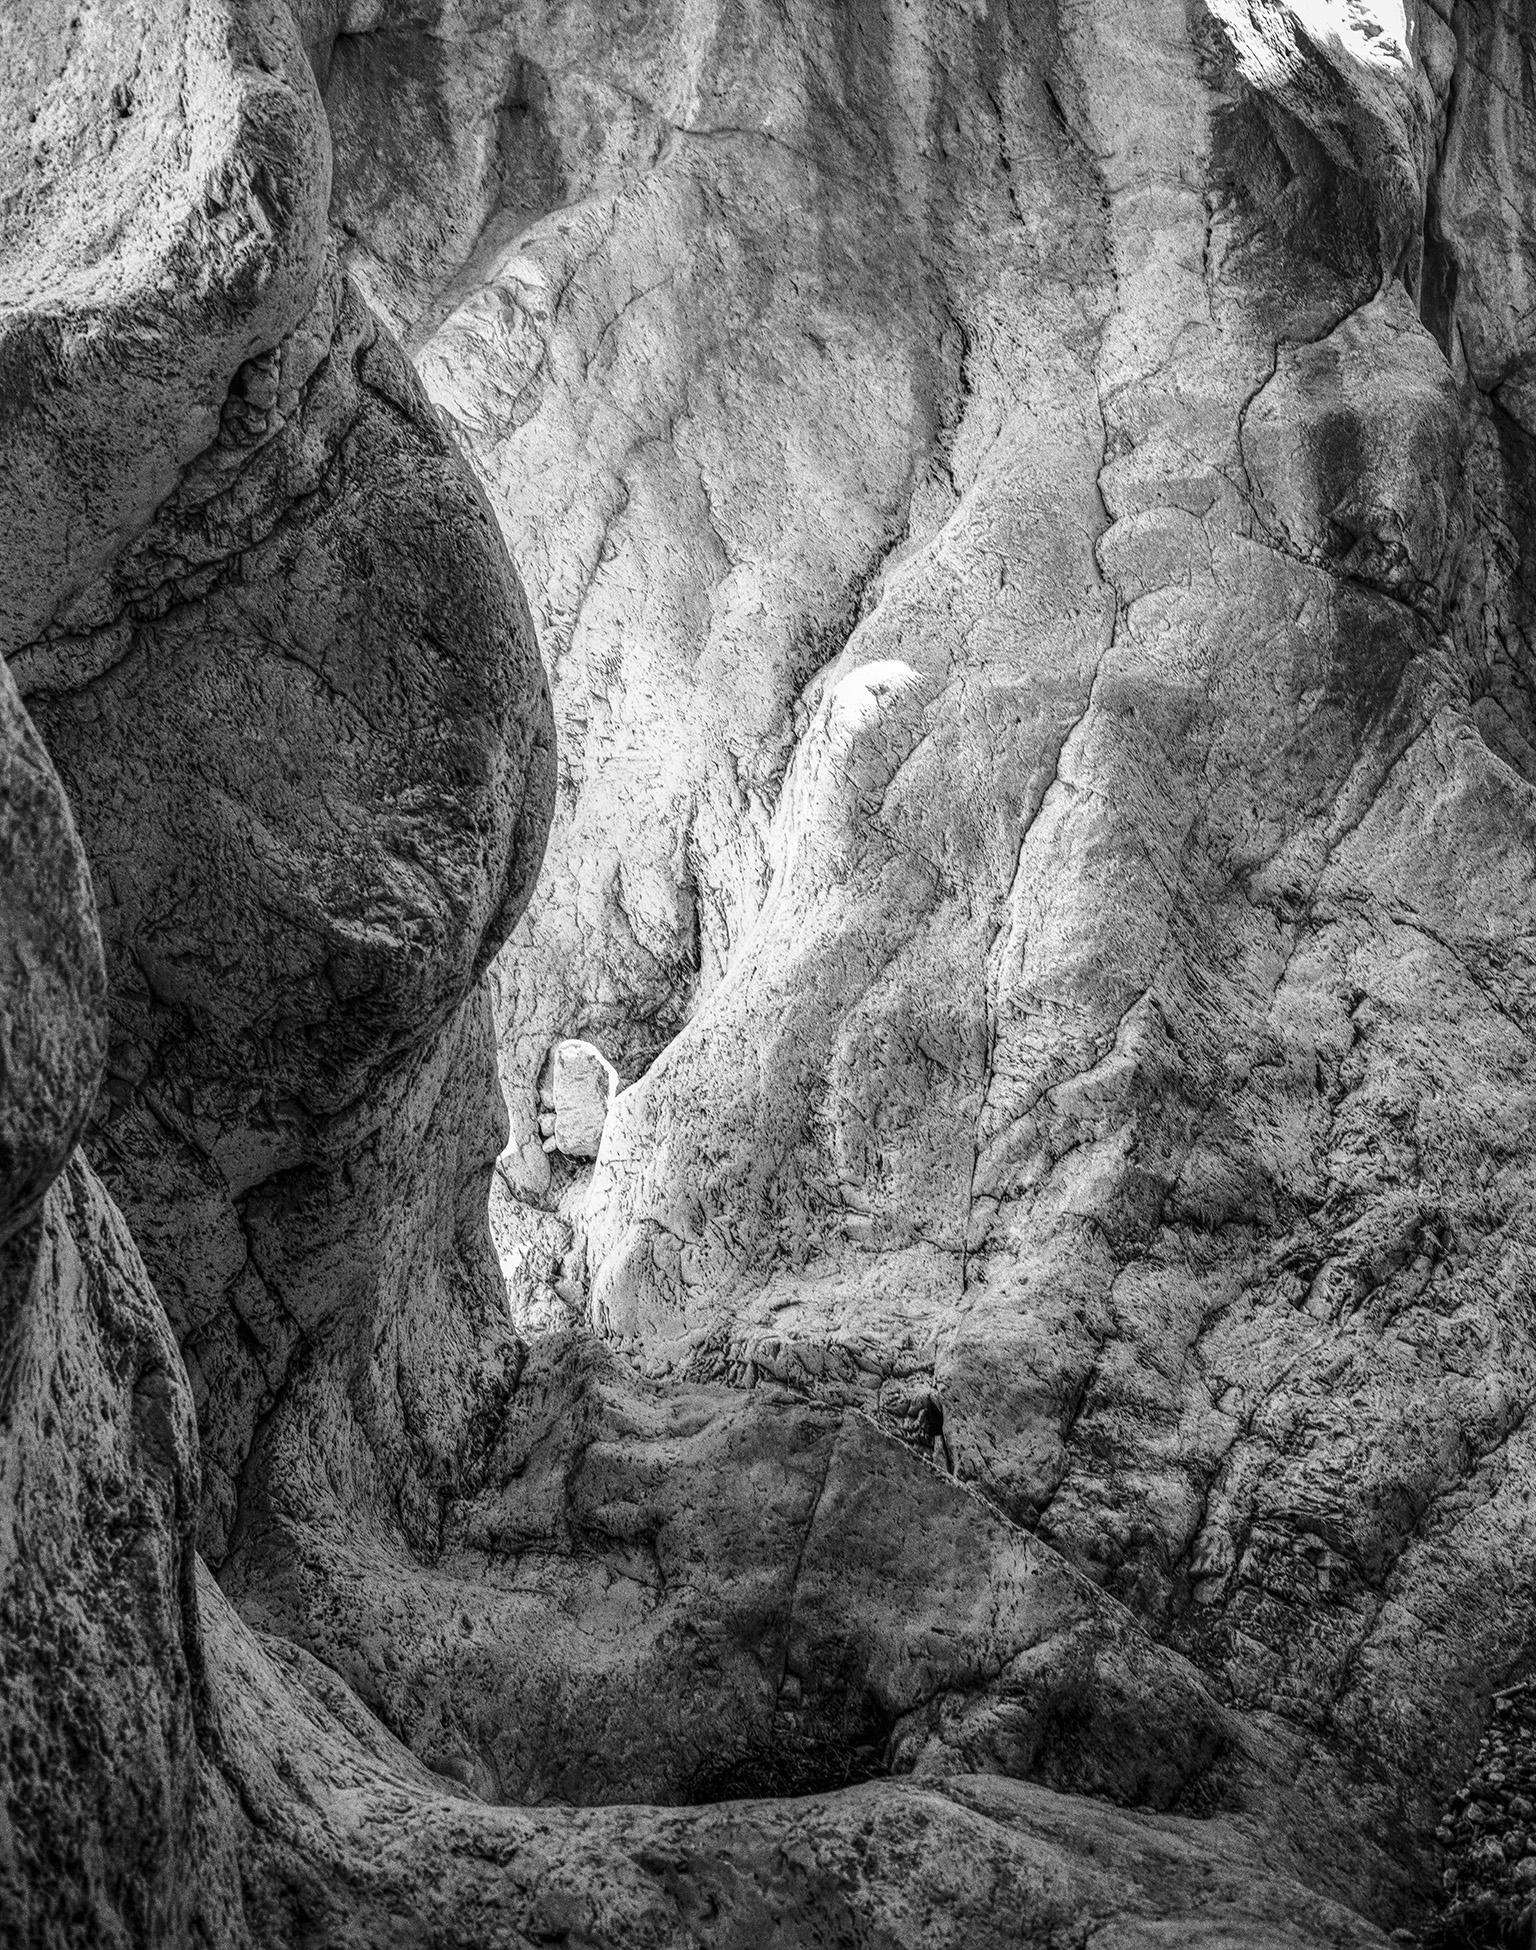 John Stathatos Black and White Photograph - Homage to Heraclitus: Earth V - Black and White Landscape Photograph of a Cave